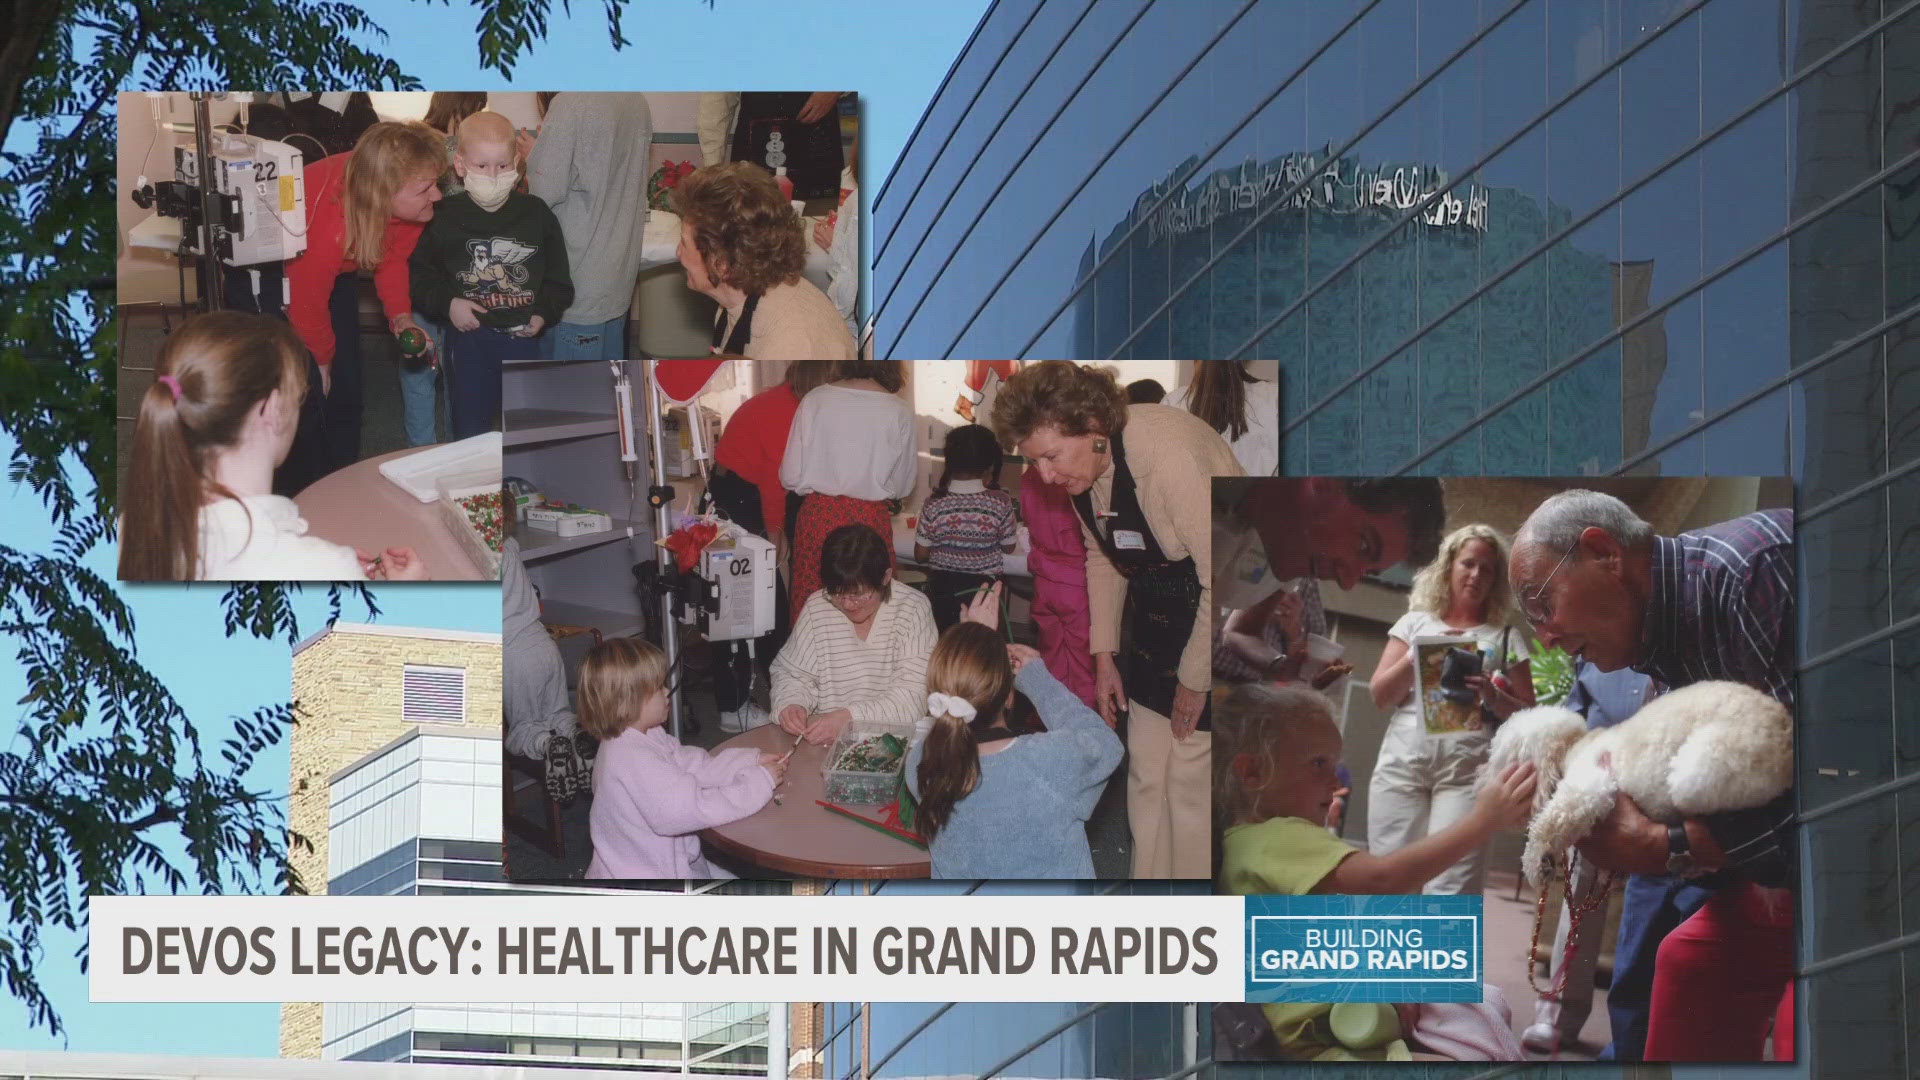 Helen DeVos Children's Hospital and the Rich DeVos Heart and Lung Transplant Program brought specialty, world class healthcare to Grand Rapids.